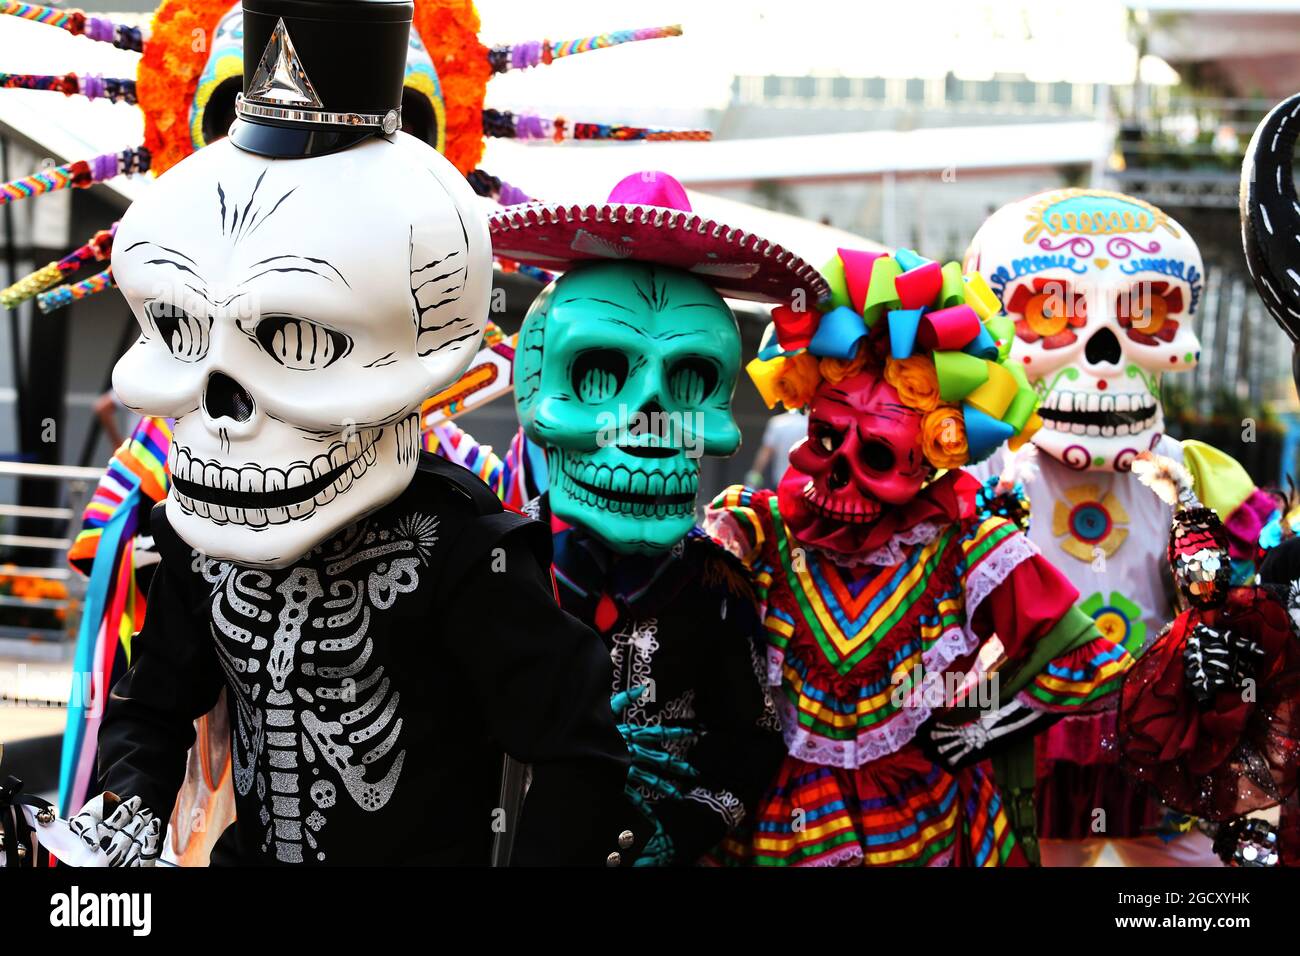 Day of the Dead costume wearers. Mexican Grand Prix, Thursday 26th October 2017. Mexico City, Mexico. Stock Photo